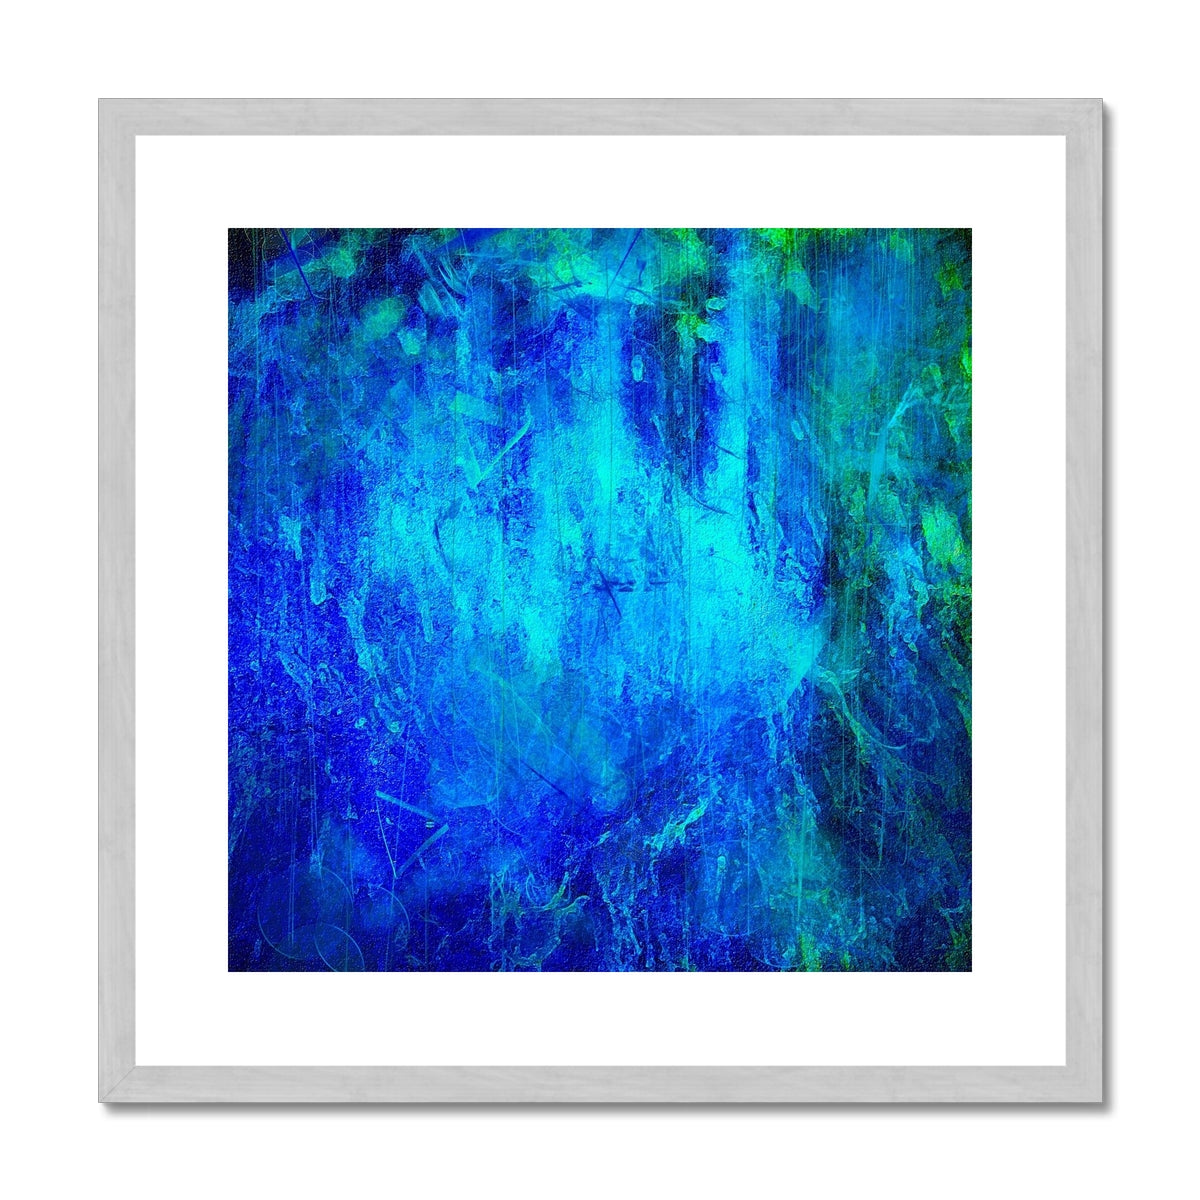 The Waterfall Abstract Painting | Antique Framed & Mounted Prints From Scotland-Antique Framed & Mounted Prints-Abstract & Impressionistic Art Gallery-20"x20"-Silver Frame-Paintings, Prints, Homeware, Art Gifts From Scotland By Scottish Artist Kevin Hunter